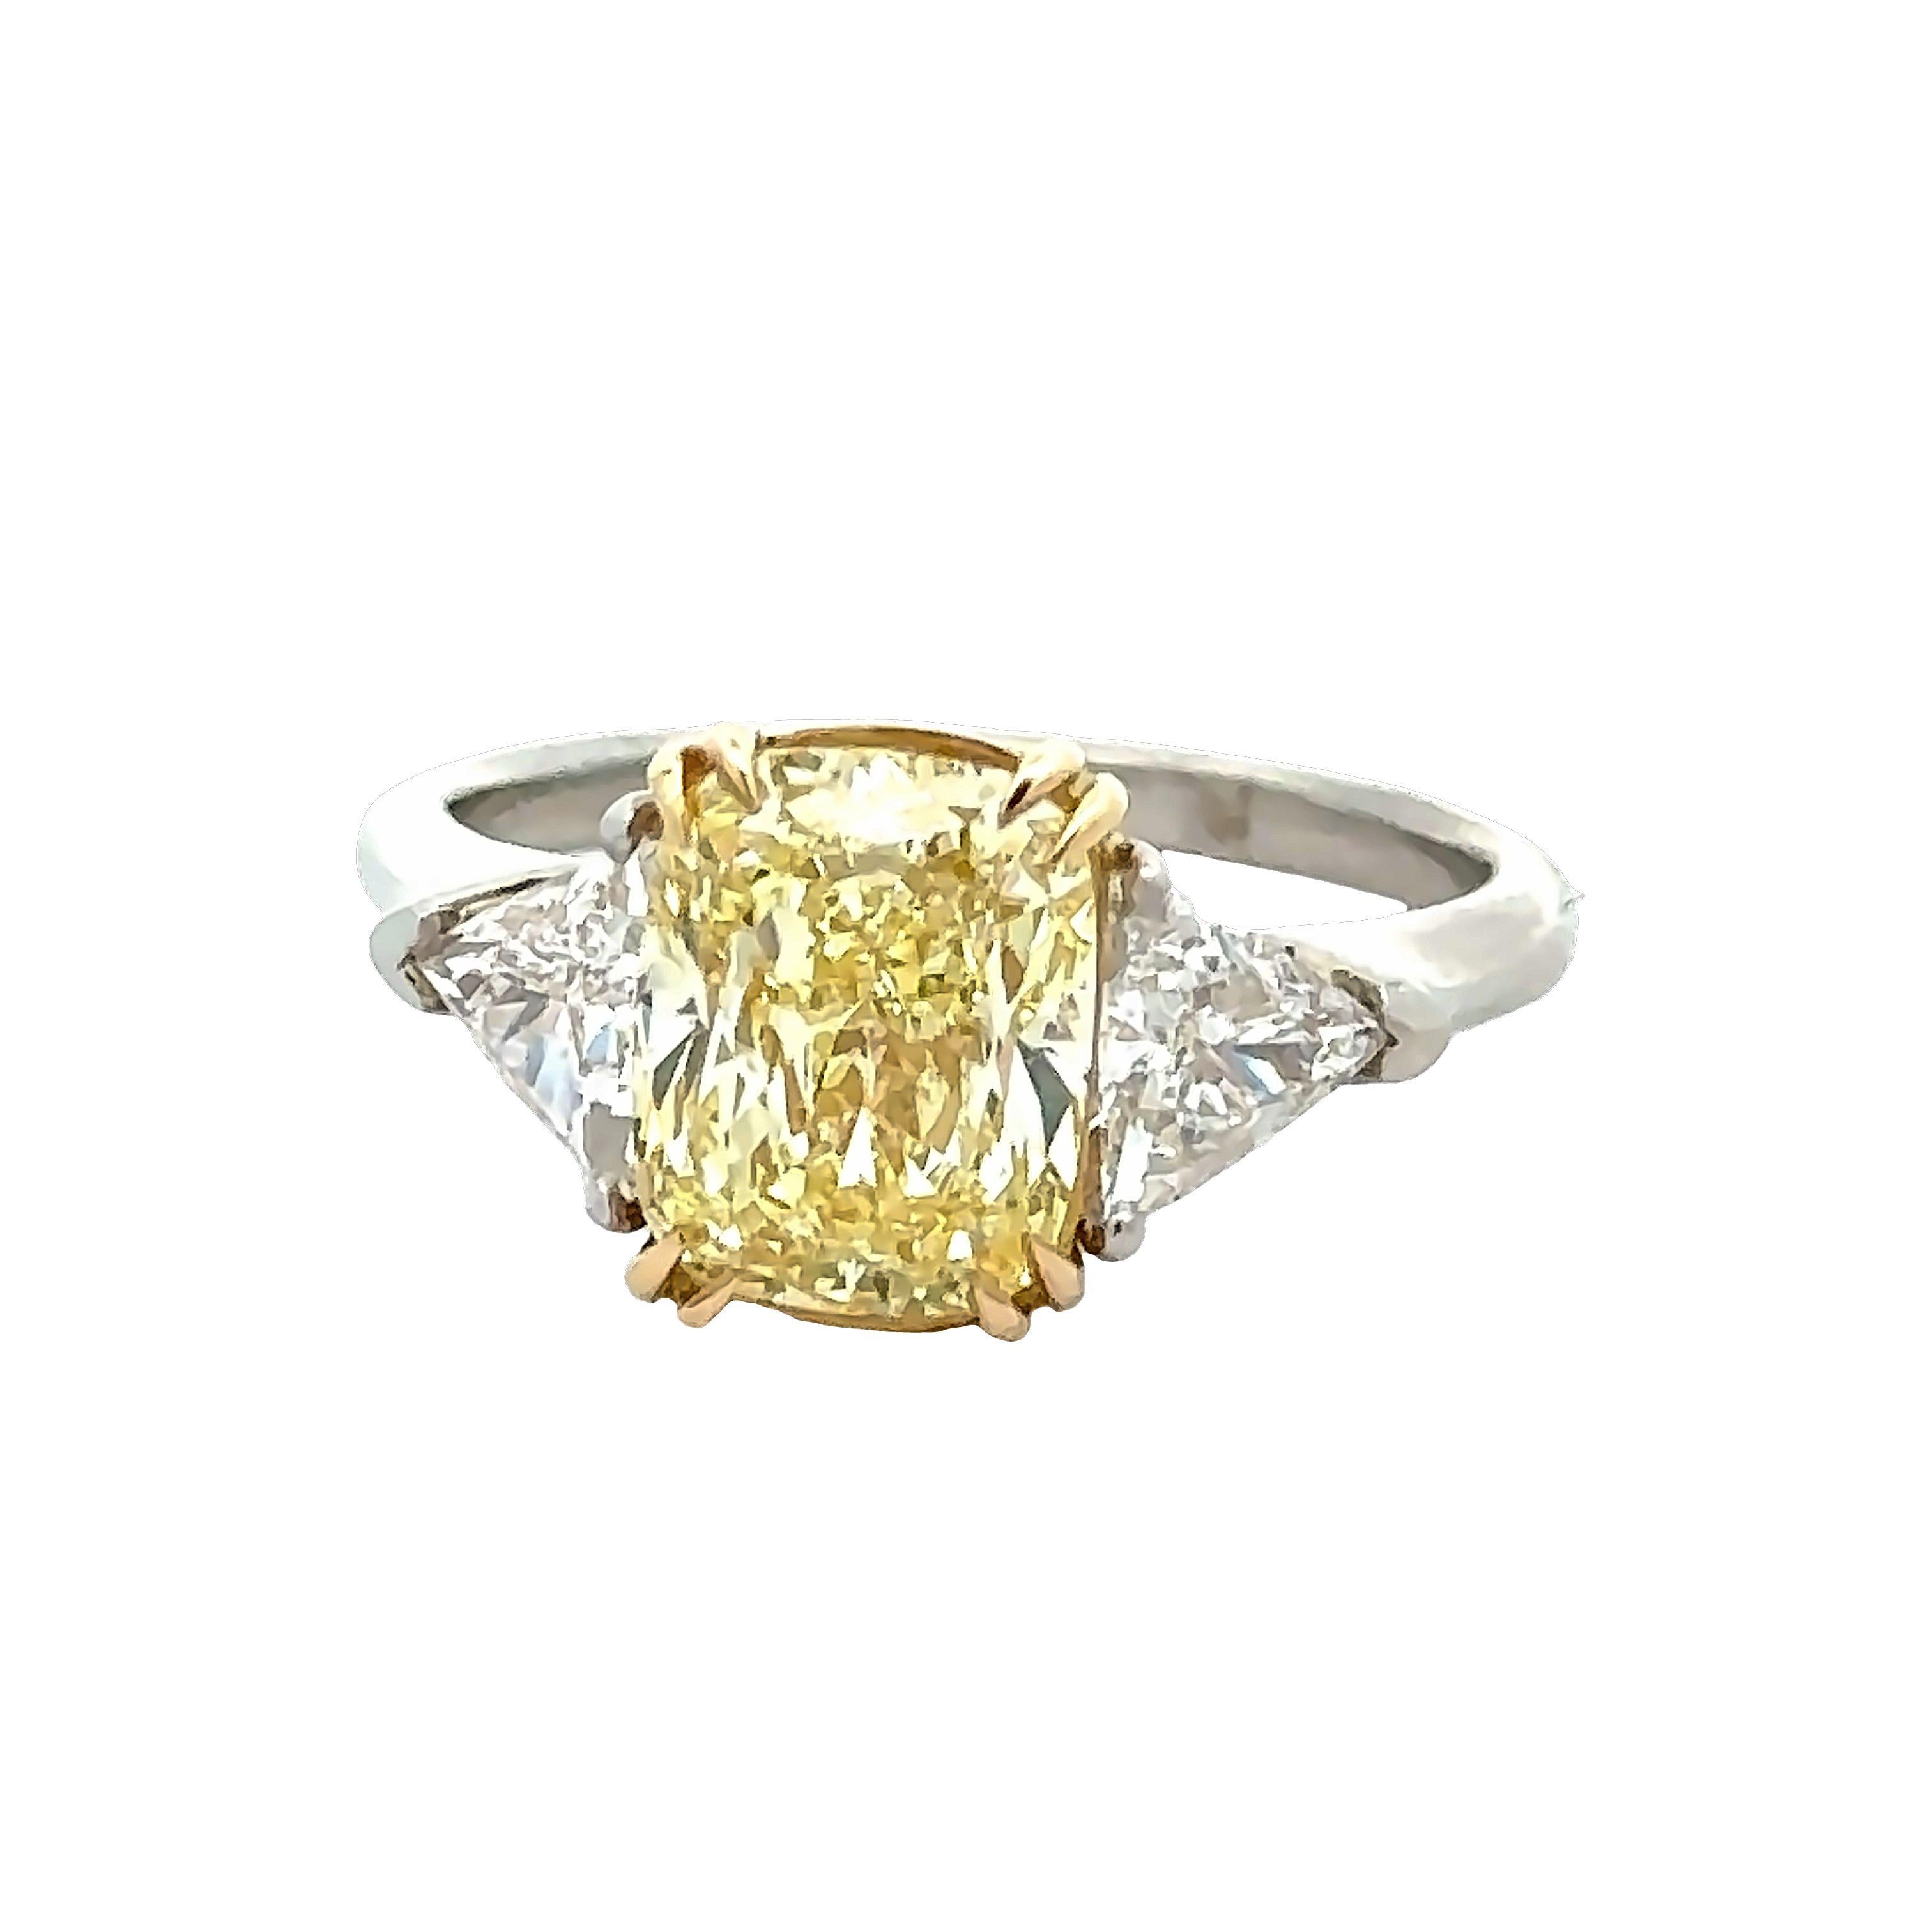 GIA Certified 2.58 Carat Fancy Yellow Cushion Cut Diamond Ring In New Condition For Sale In Aventura, FL